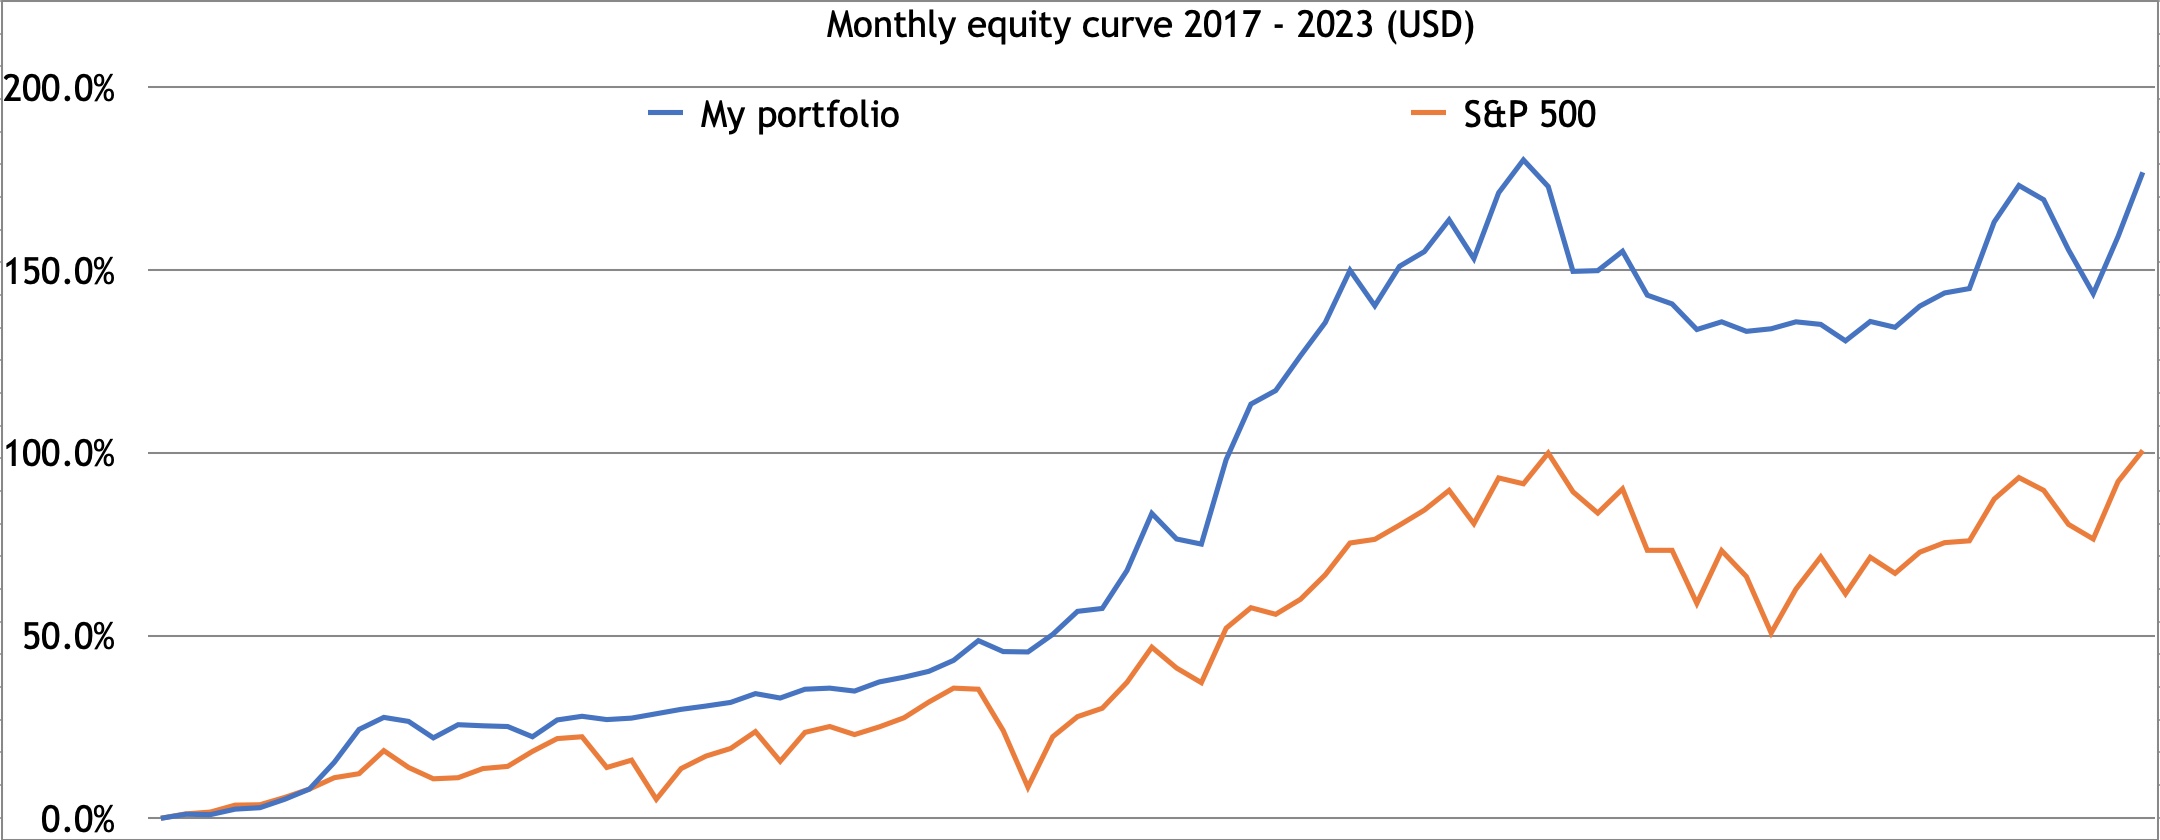 Equity curve 2023 SPX